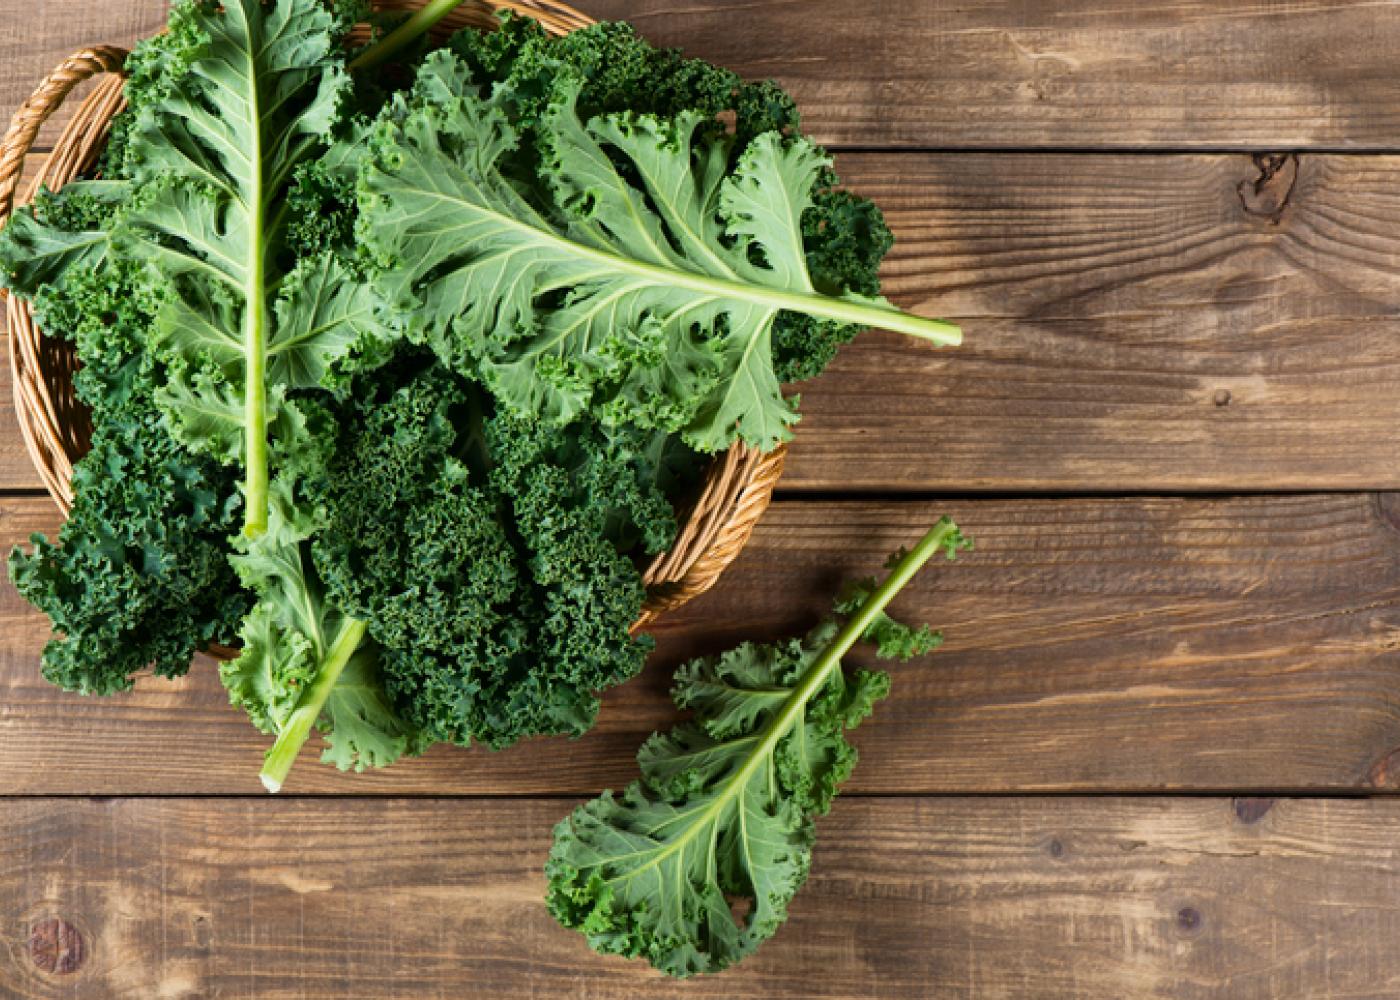 If You Have at Least 12/23 of These Foods in Your Kitchen, You’re Officially Middle-Class Kale